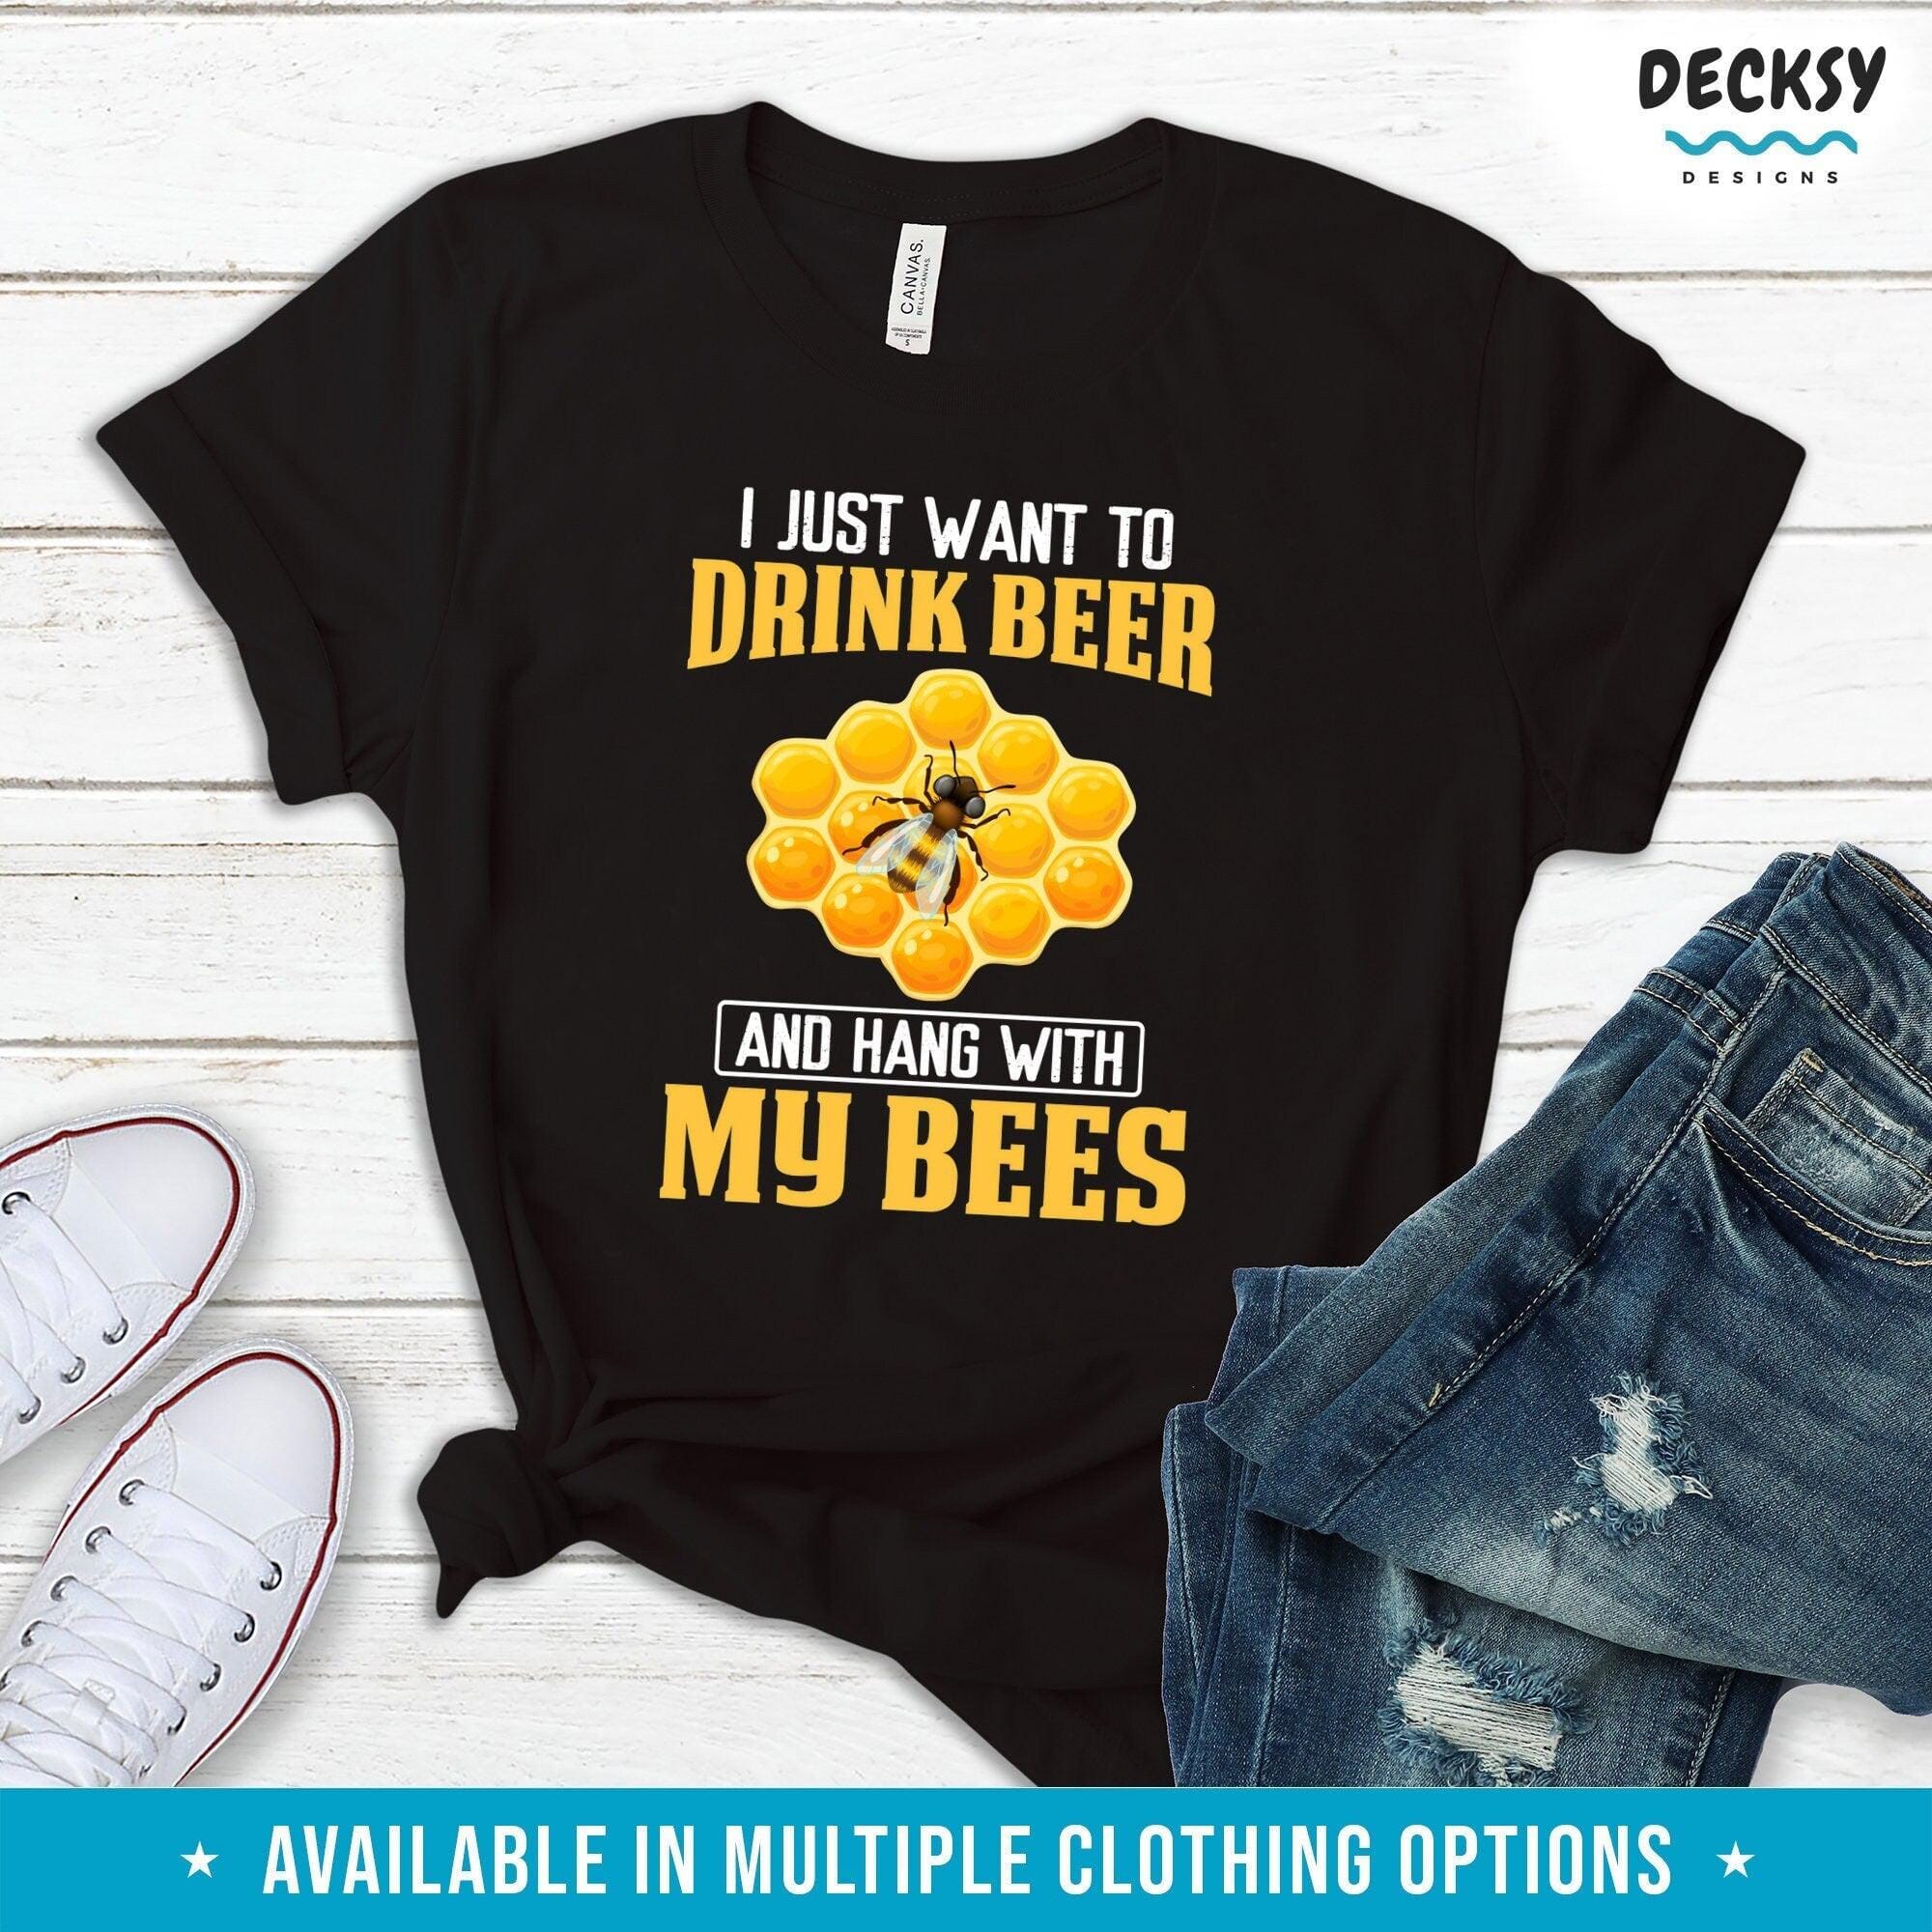 Beekeeping T-Shirt, Gift For Beer Lover-Clothing:Gender-Neutral Adult Clothing:Tops & Tees:T-shirts:Graphic Tees-DecksyDesigns